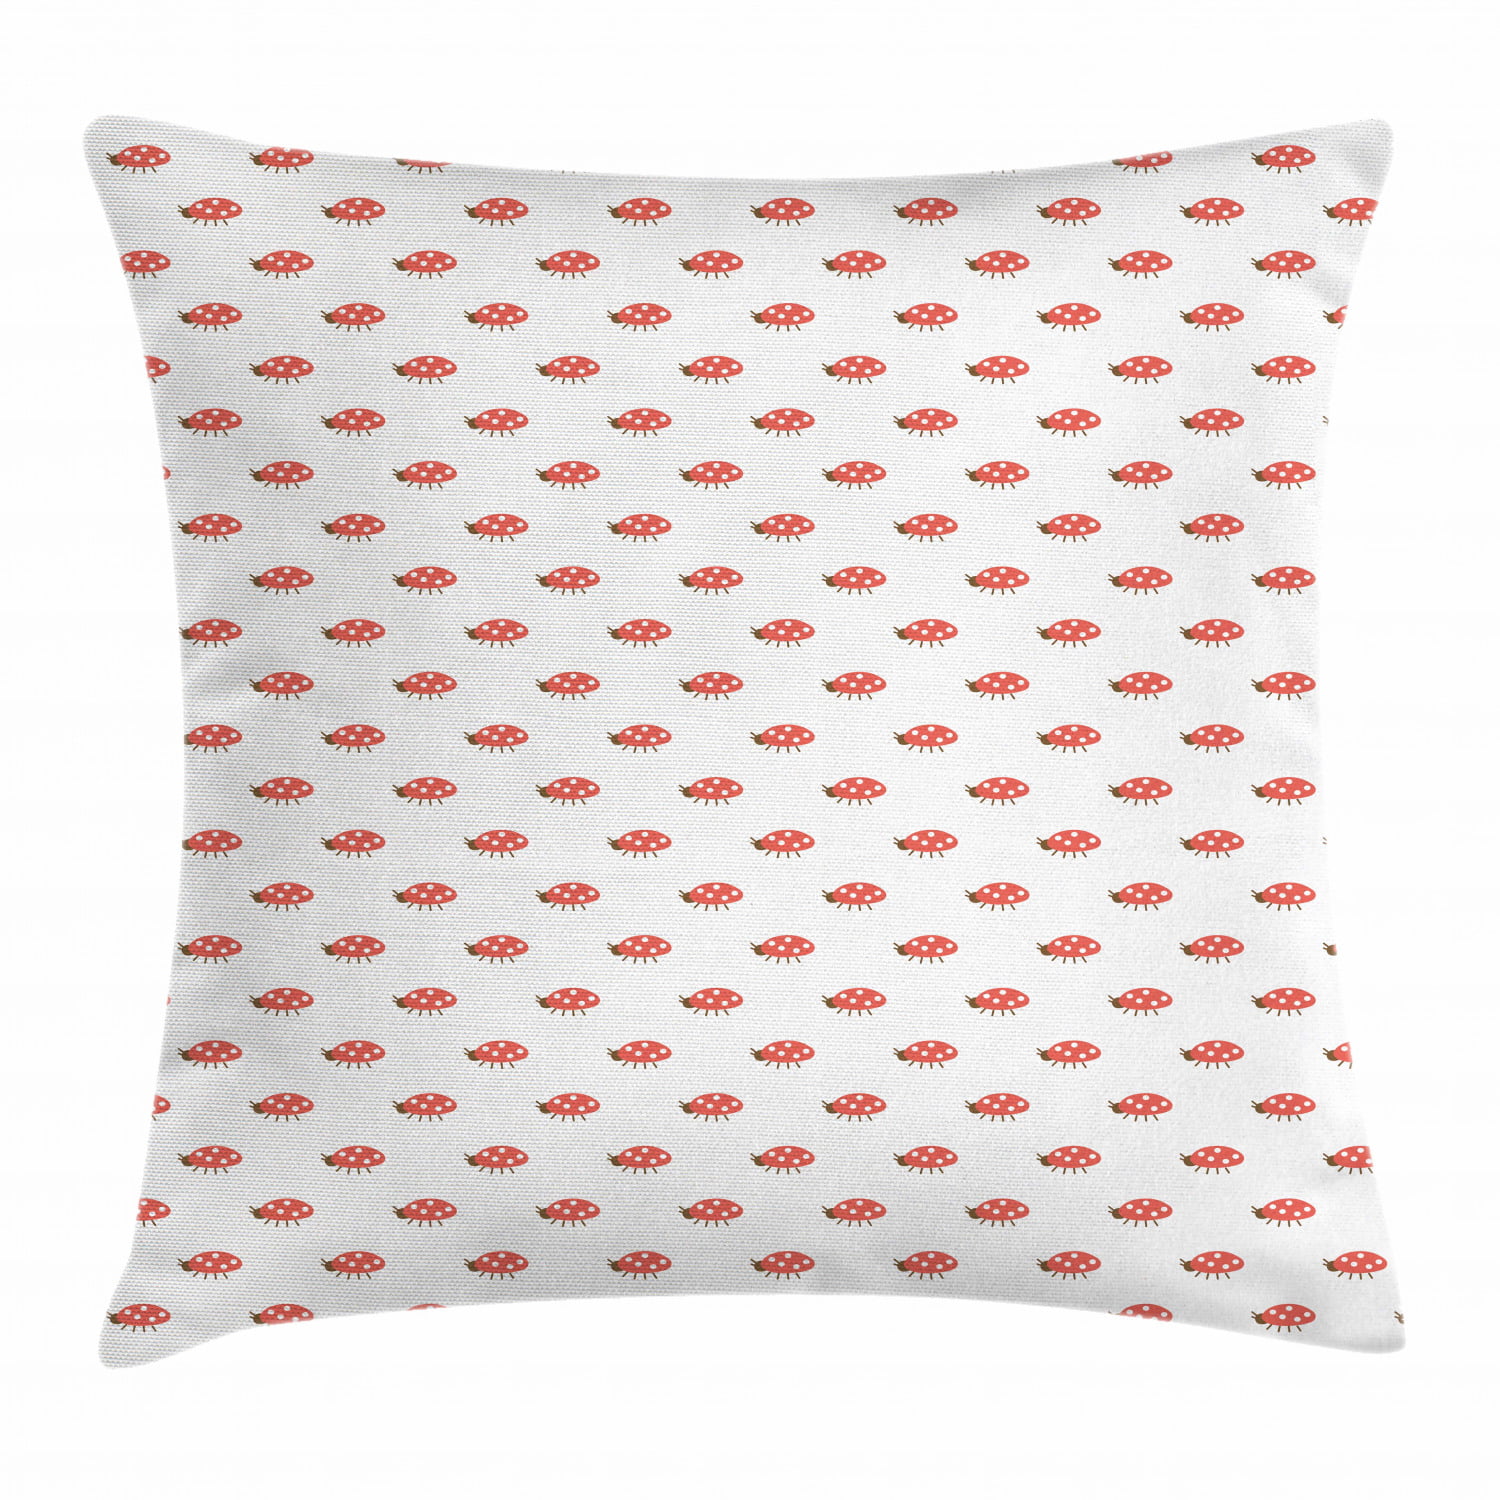 Ladybugs Throw Pillow Cases Cushion Covers Home Decor 8 Sizes by Ambesonne